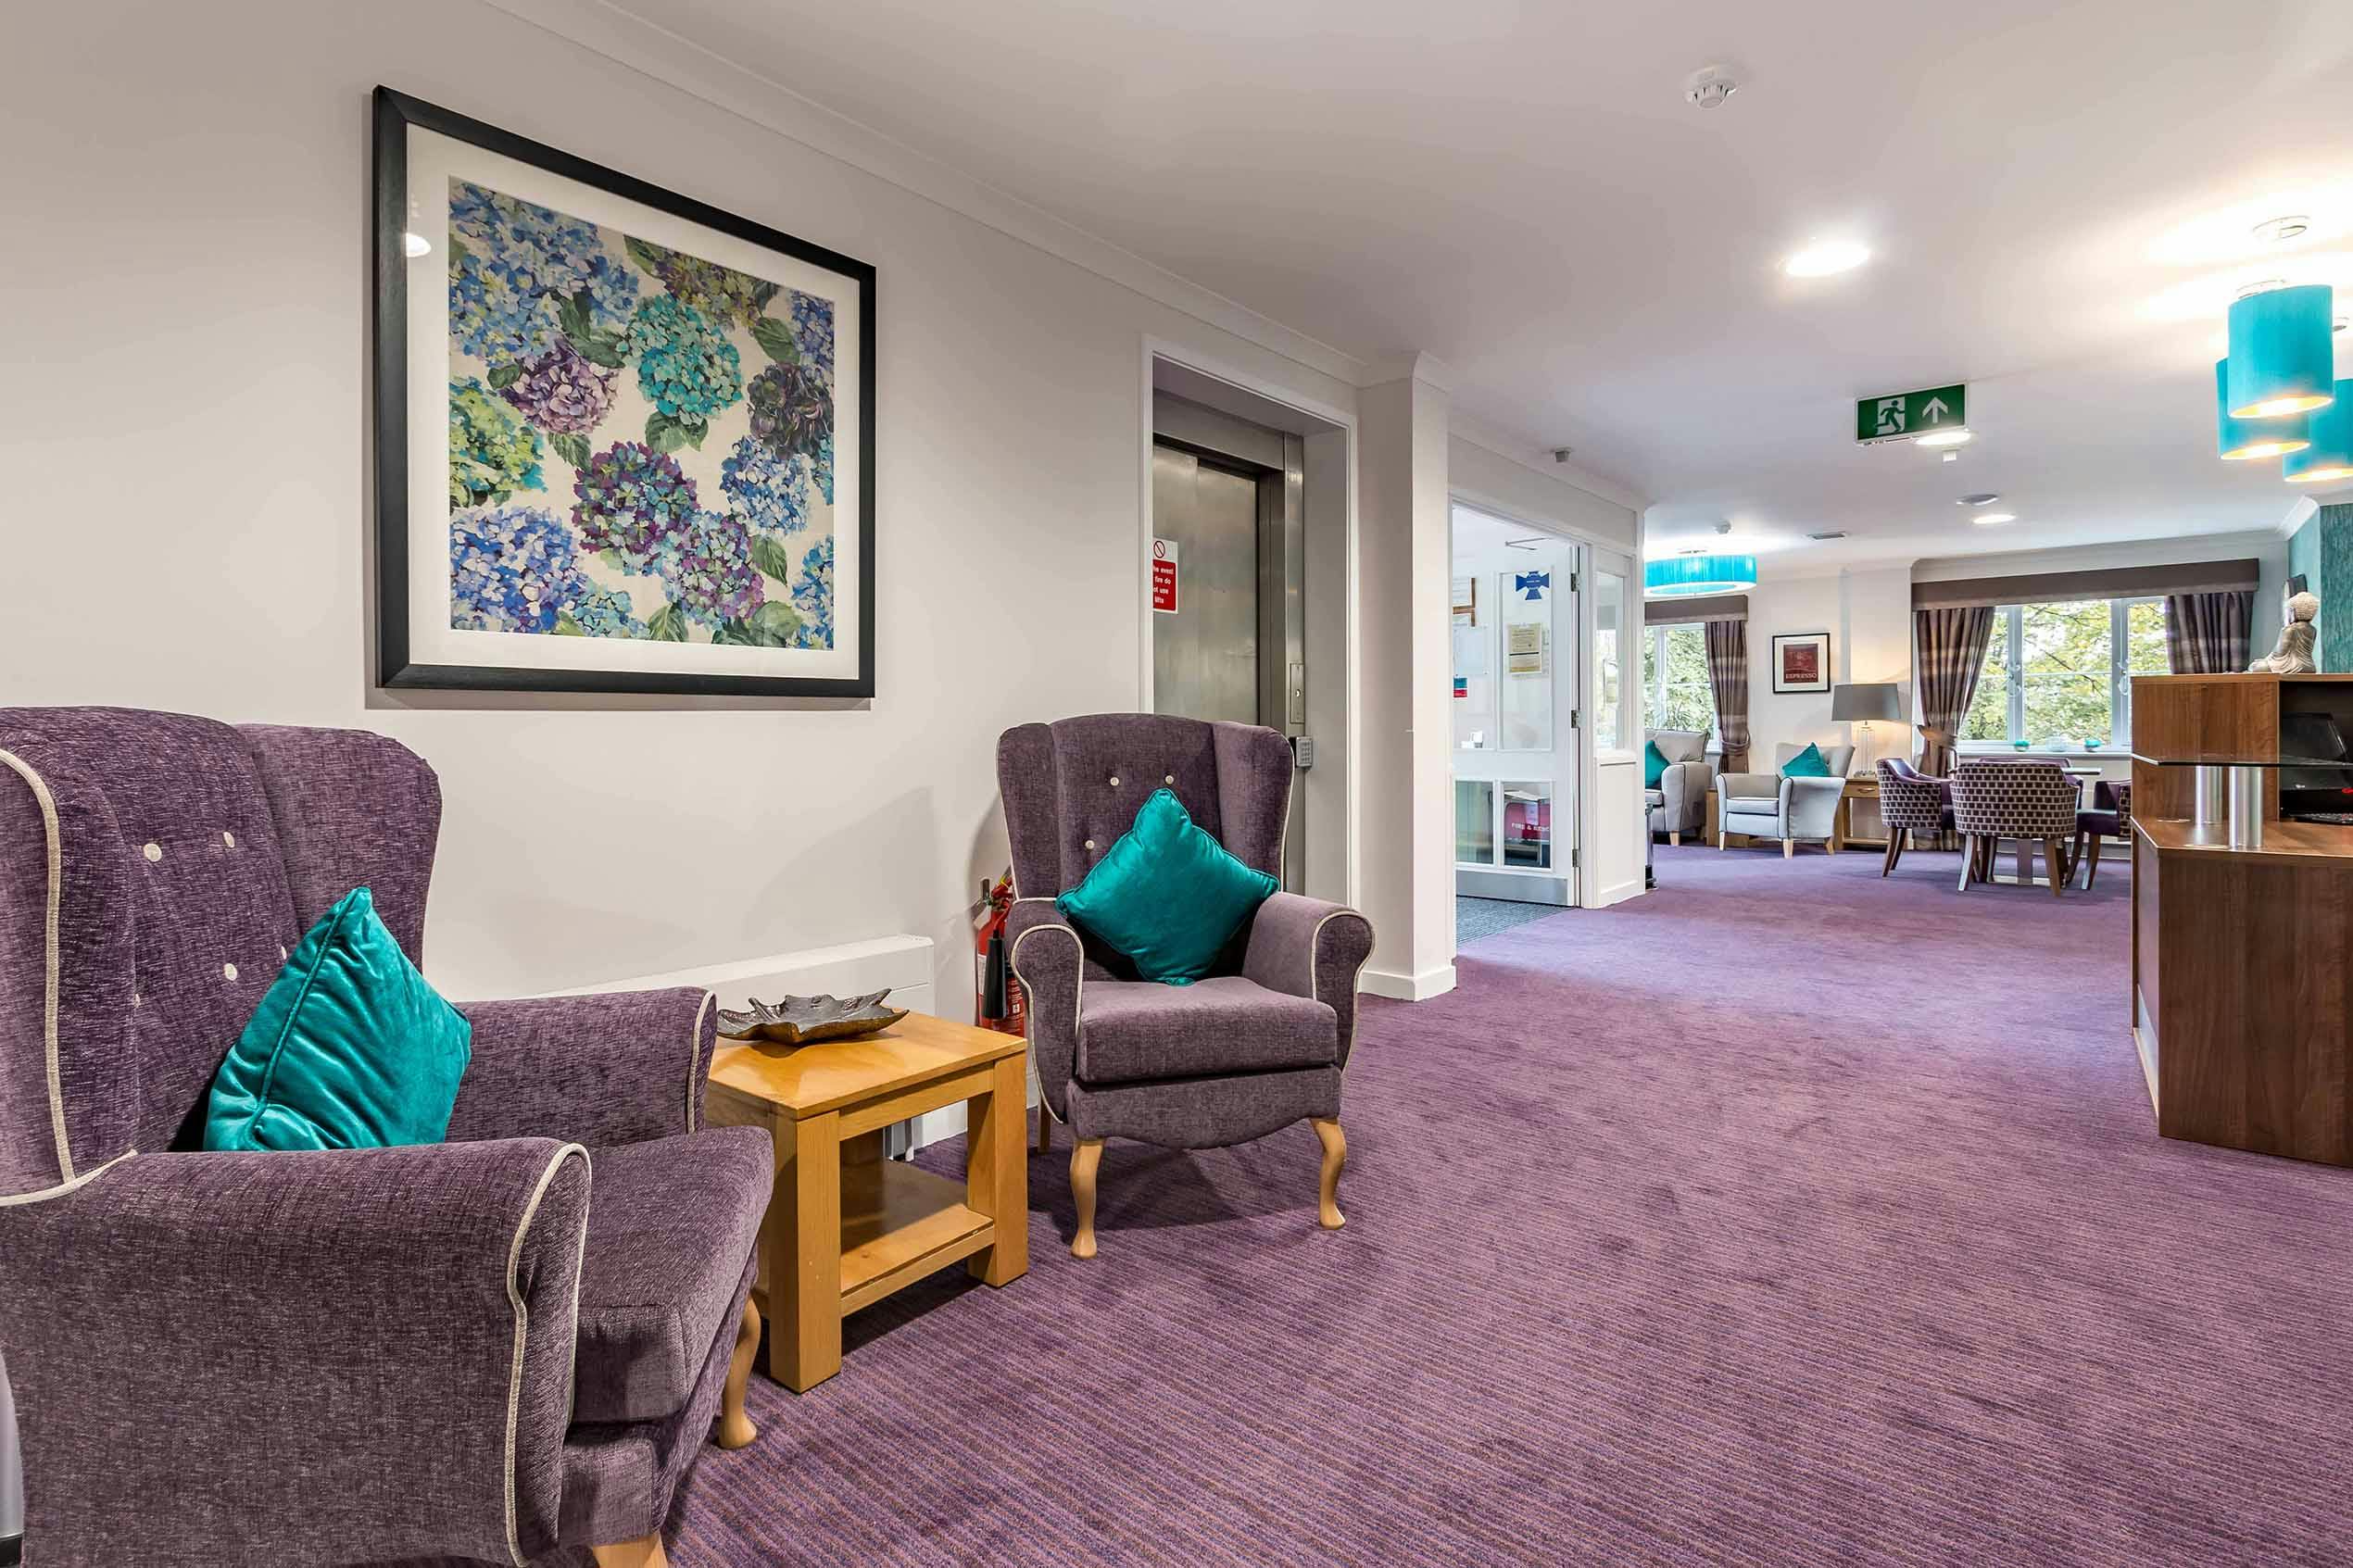 Reception at Shelburne Lodge Care Home in High Wycombe, Buckinghamshire